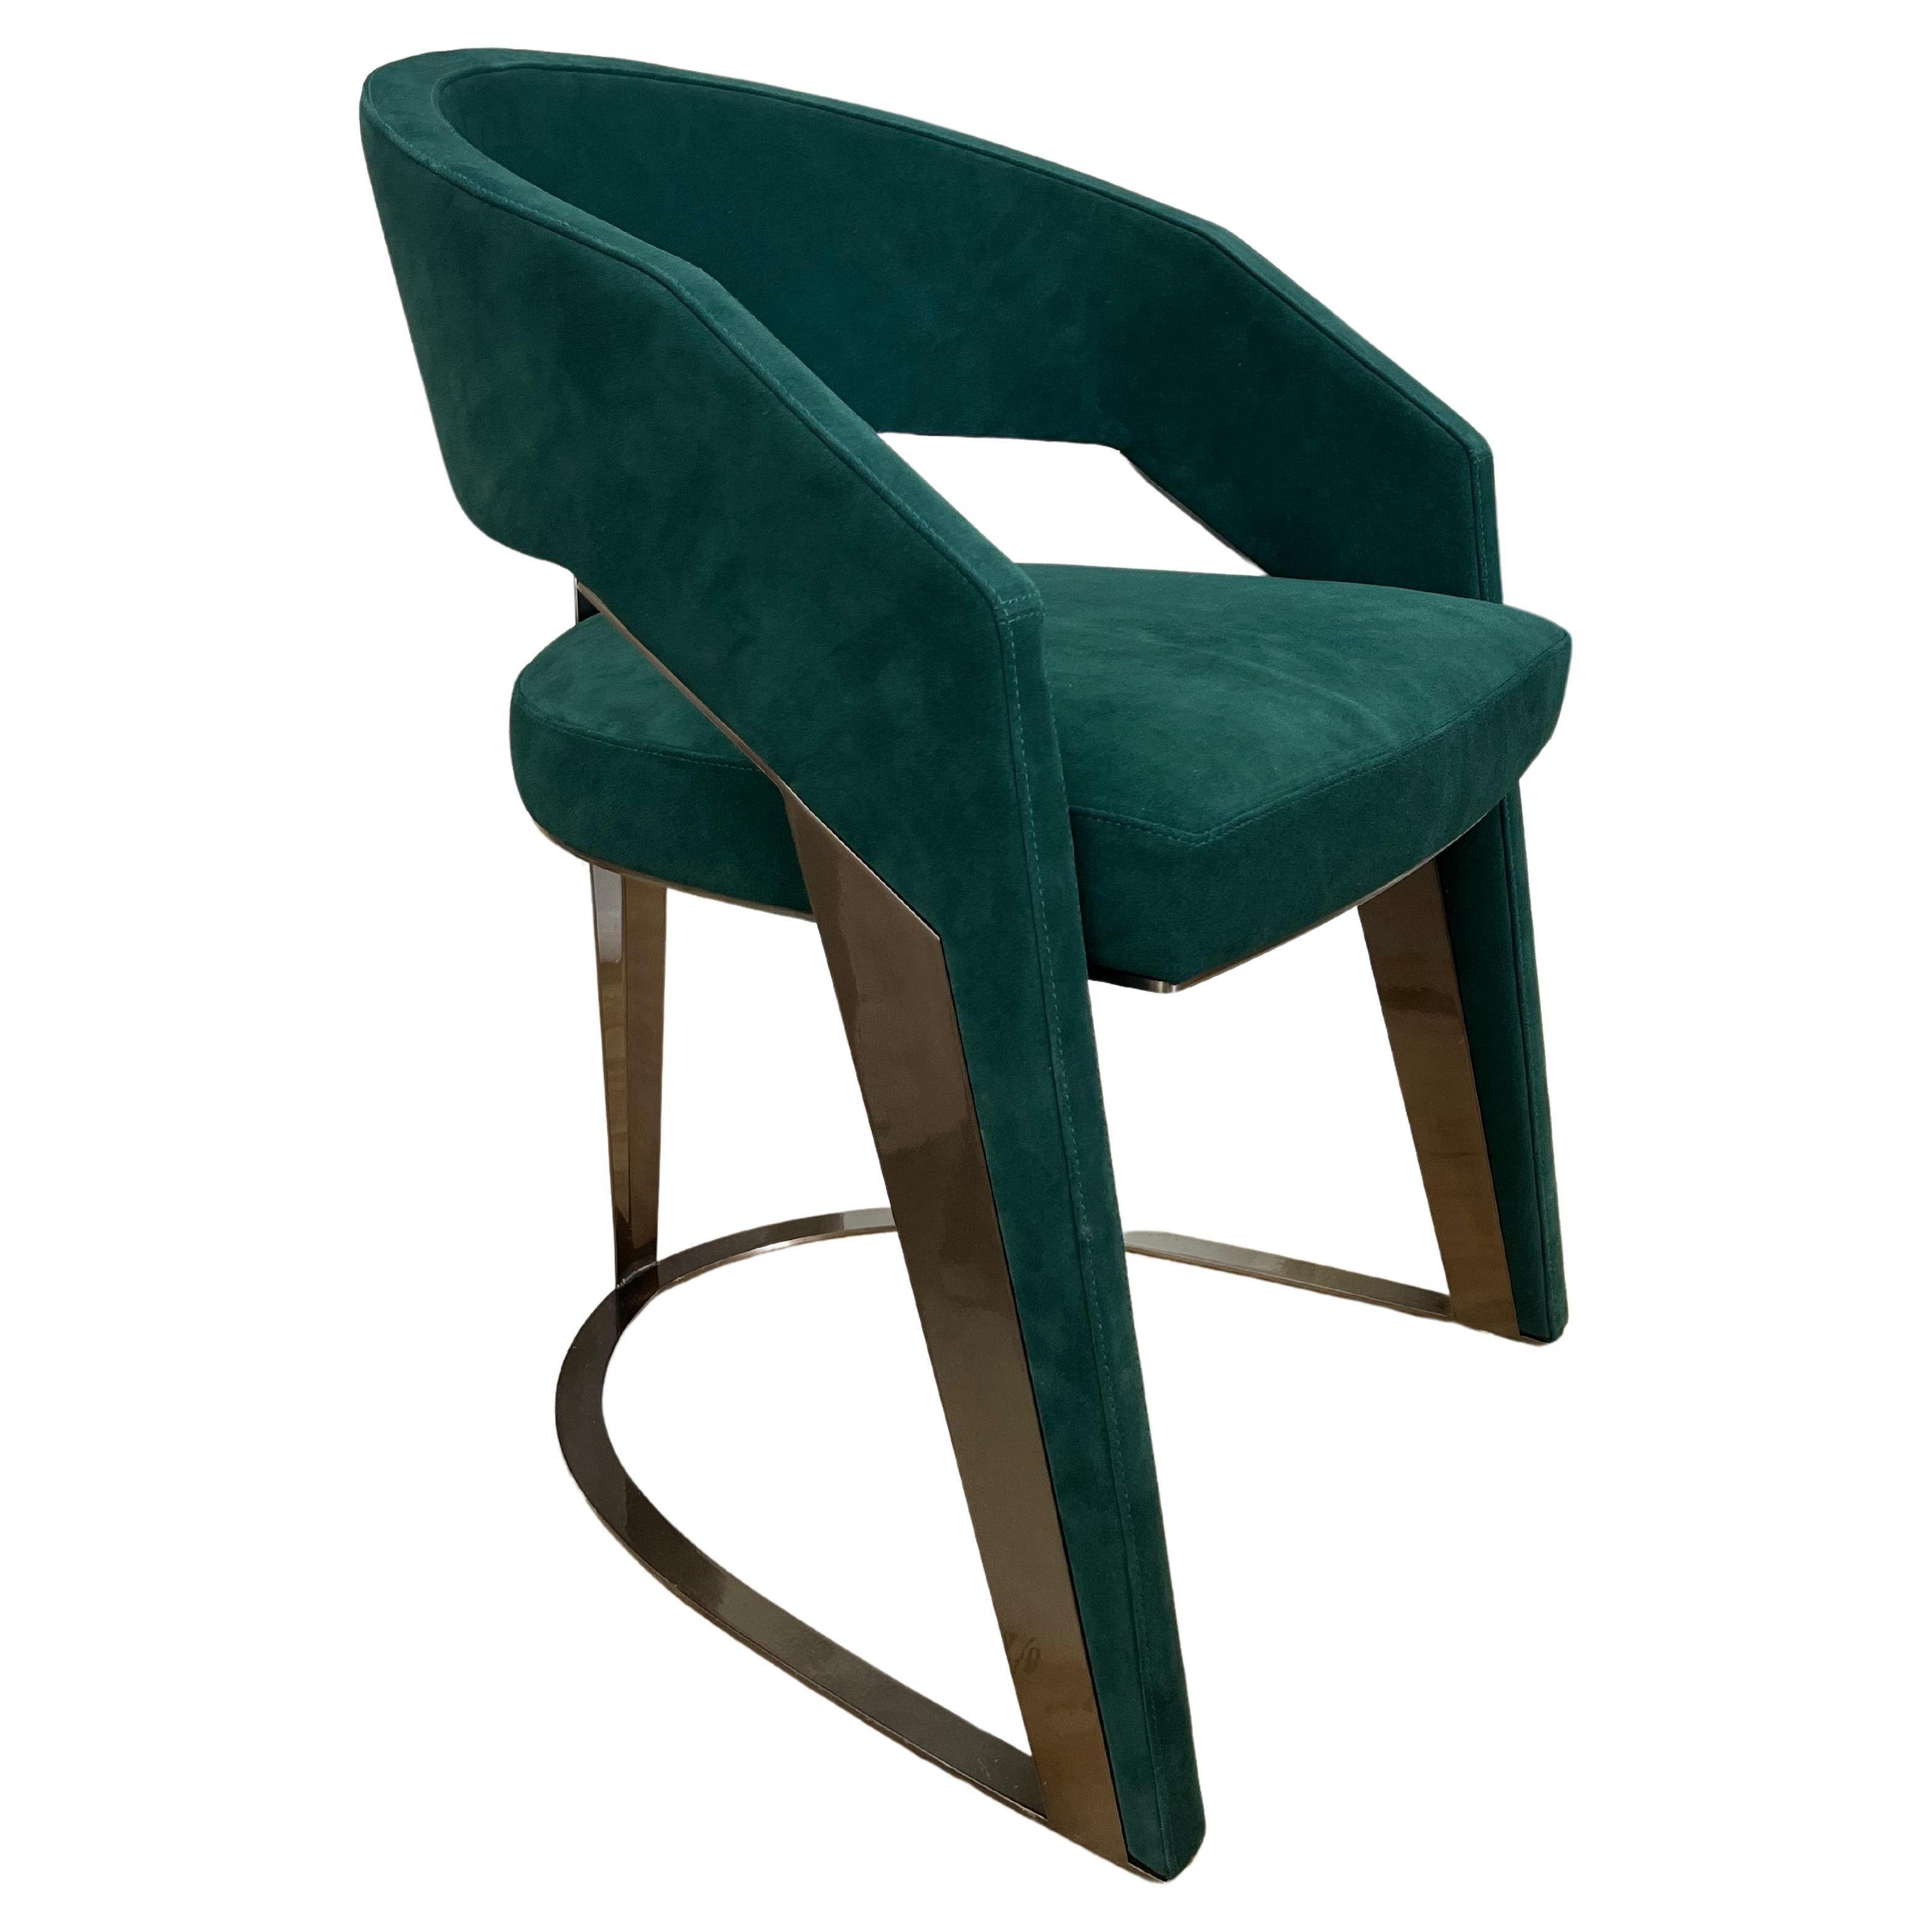 Wally dining chair For Sale